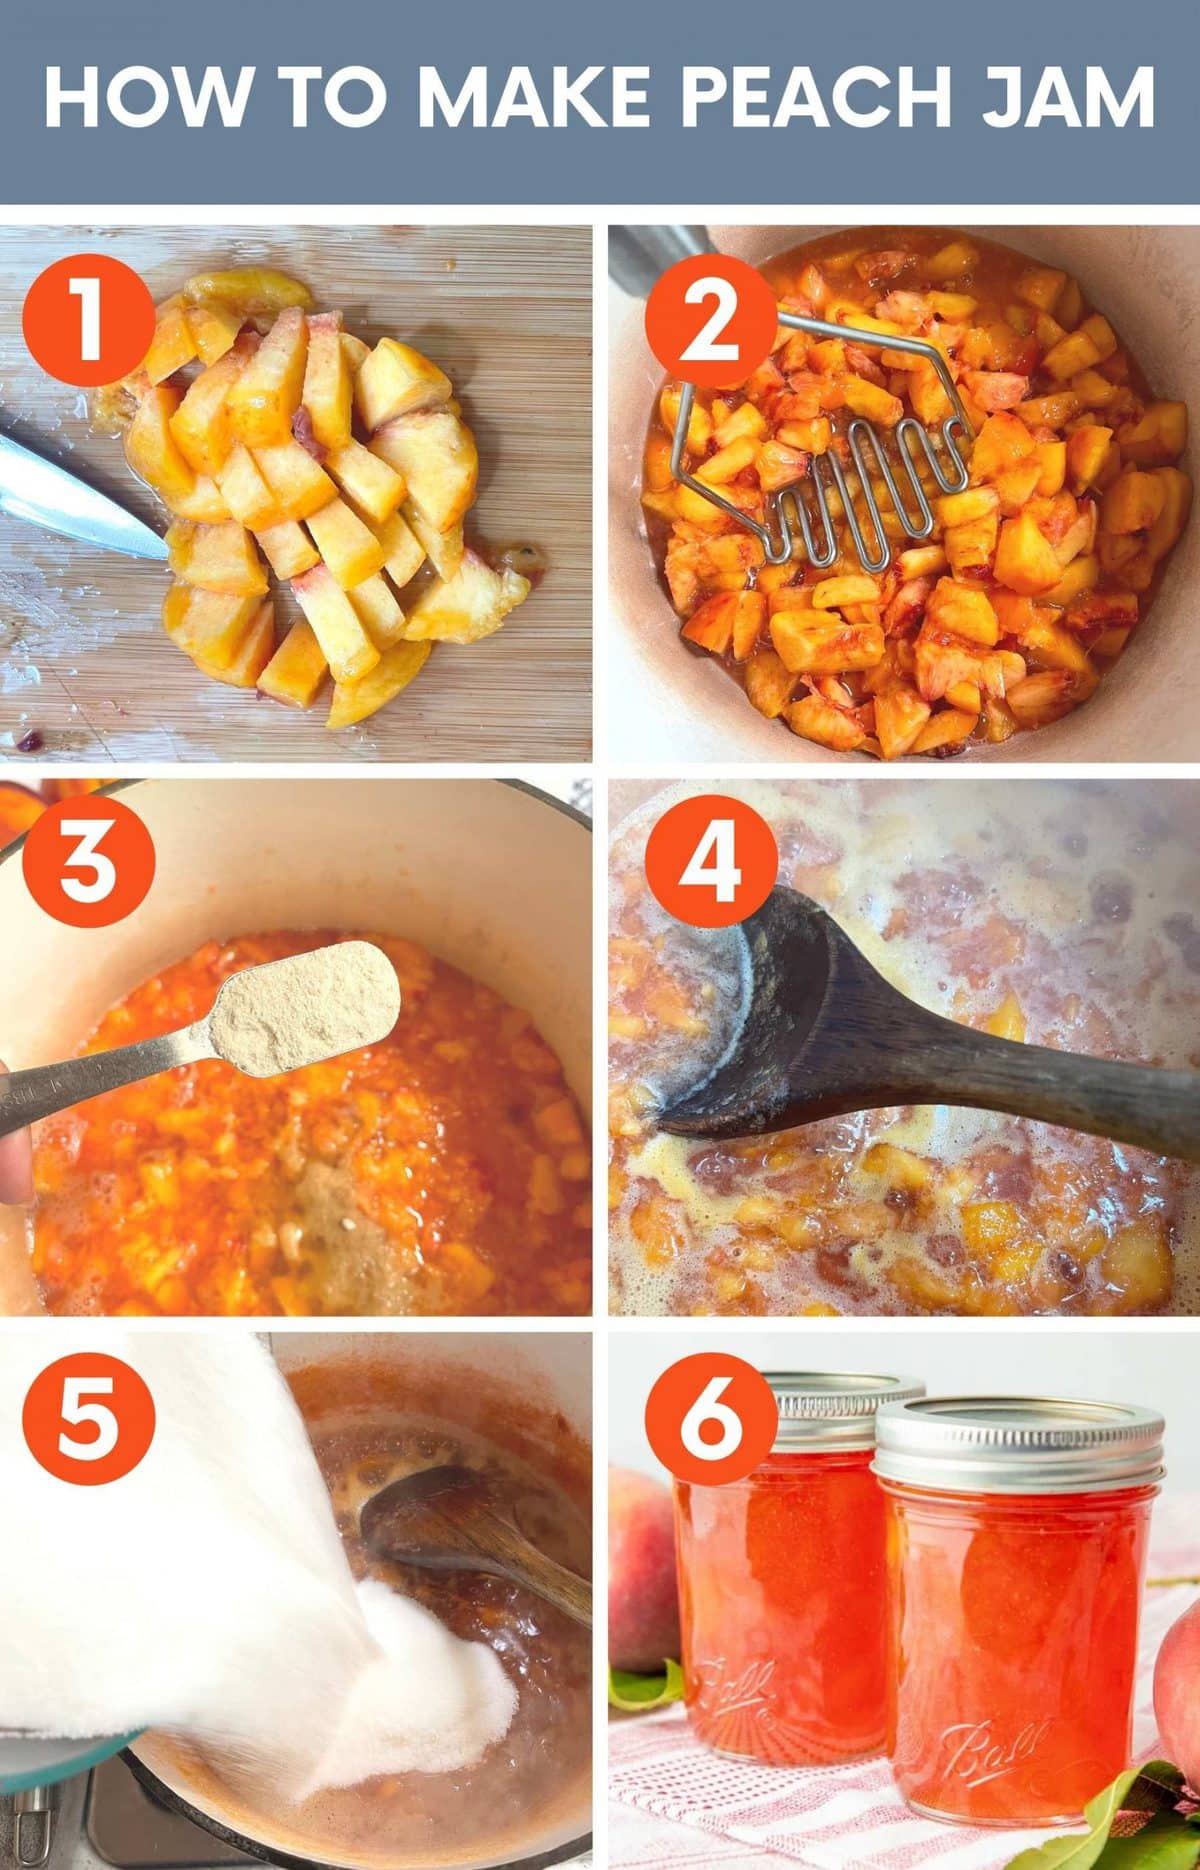 A collage of images shows the step by step instructions for making peach jam